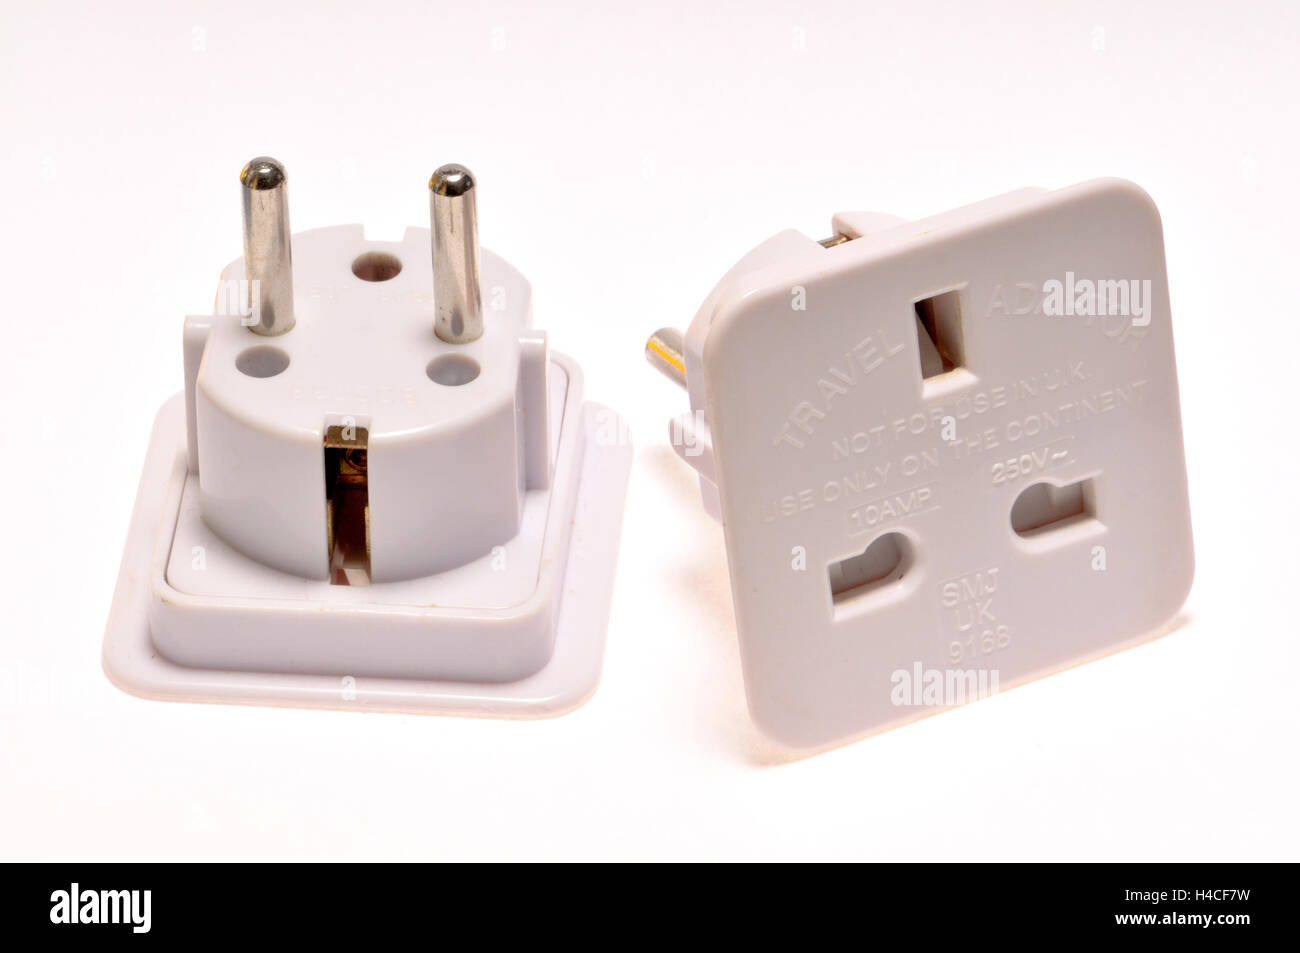 Travel plug adapter - for using a three pin UK plug in a two pin ...